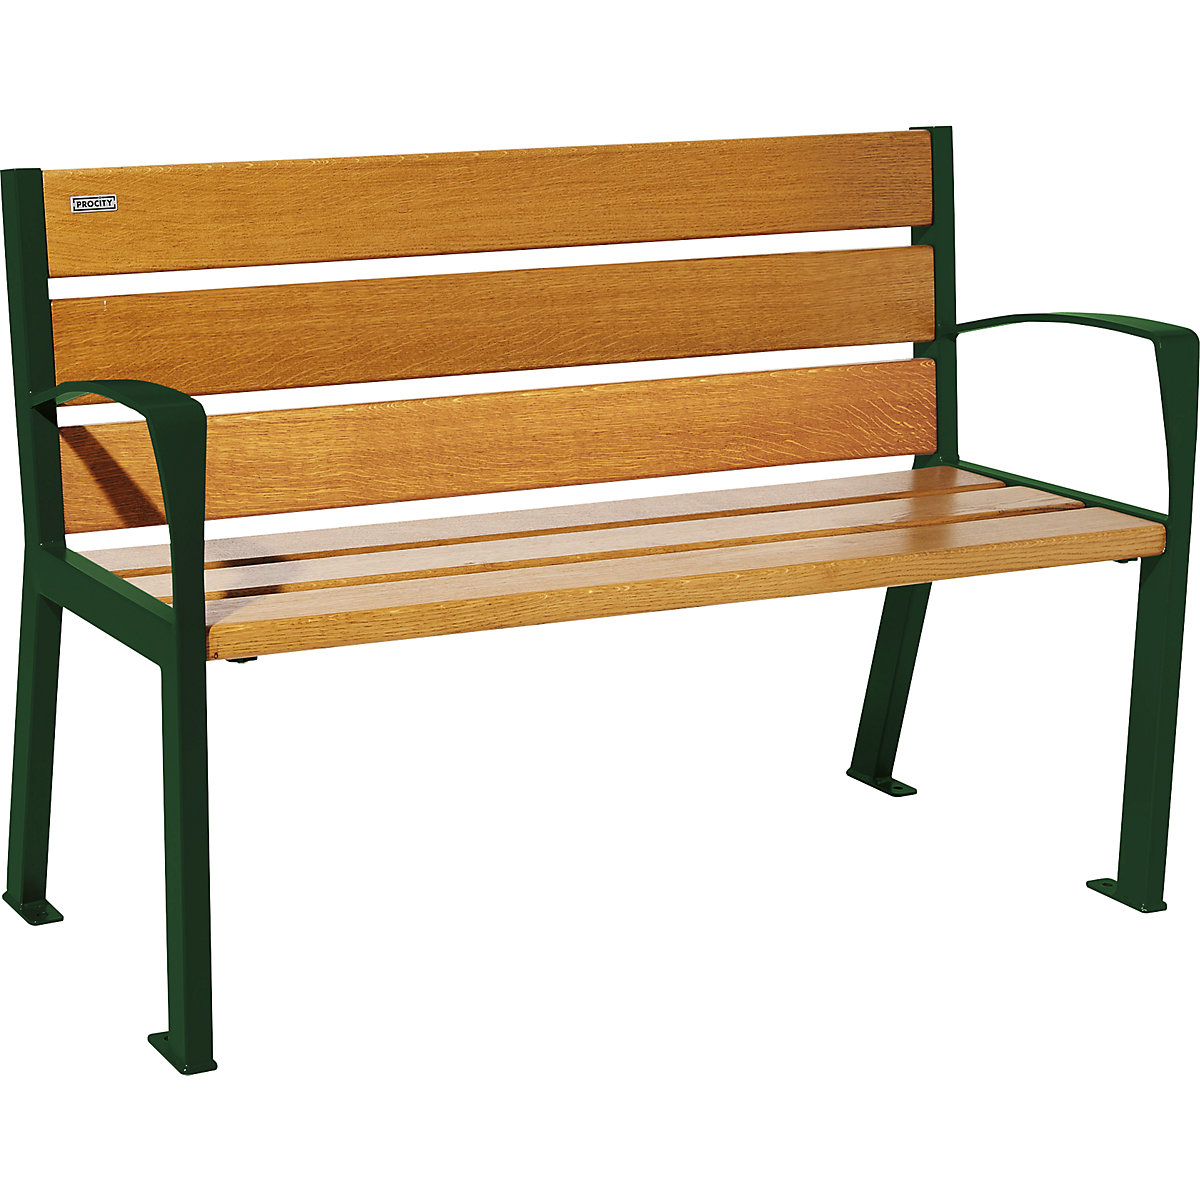 SILAOS® wooden bench with back rest - PROCITY